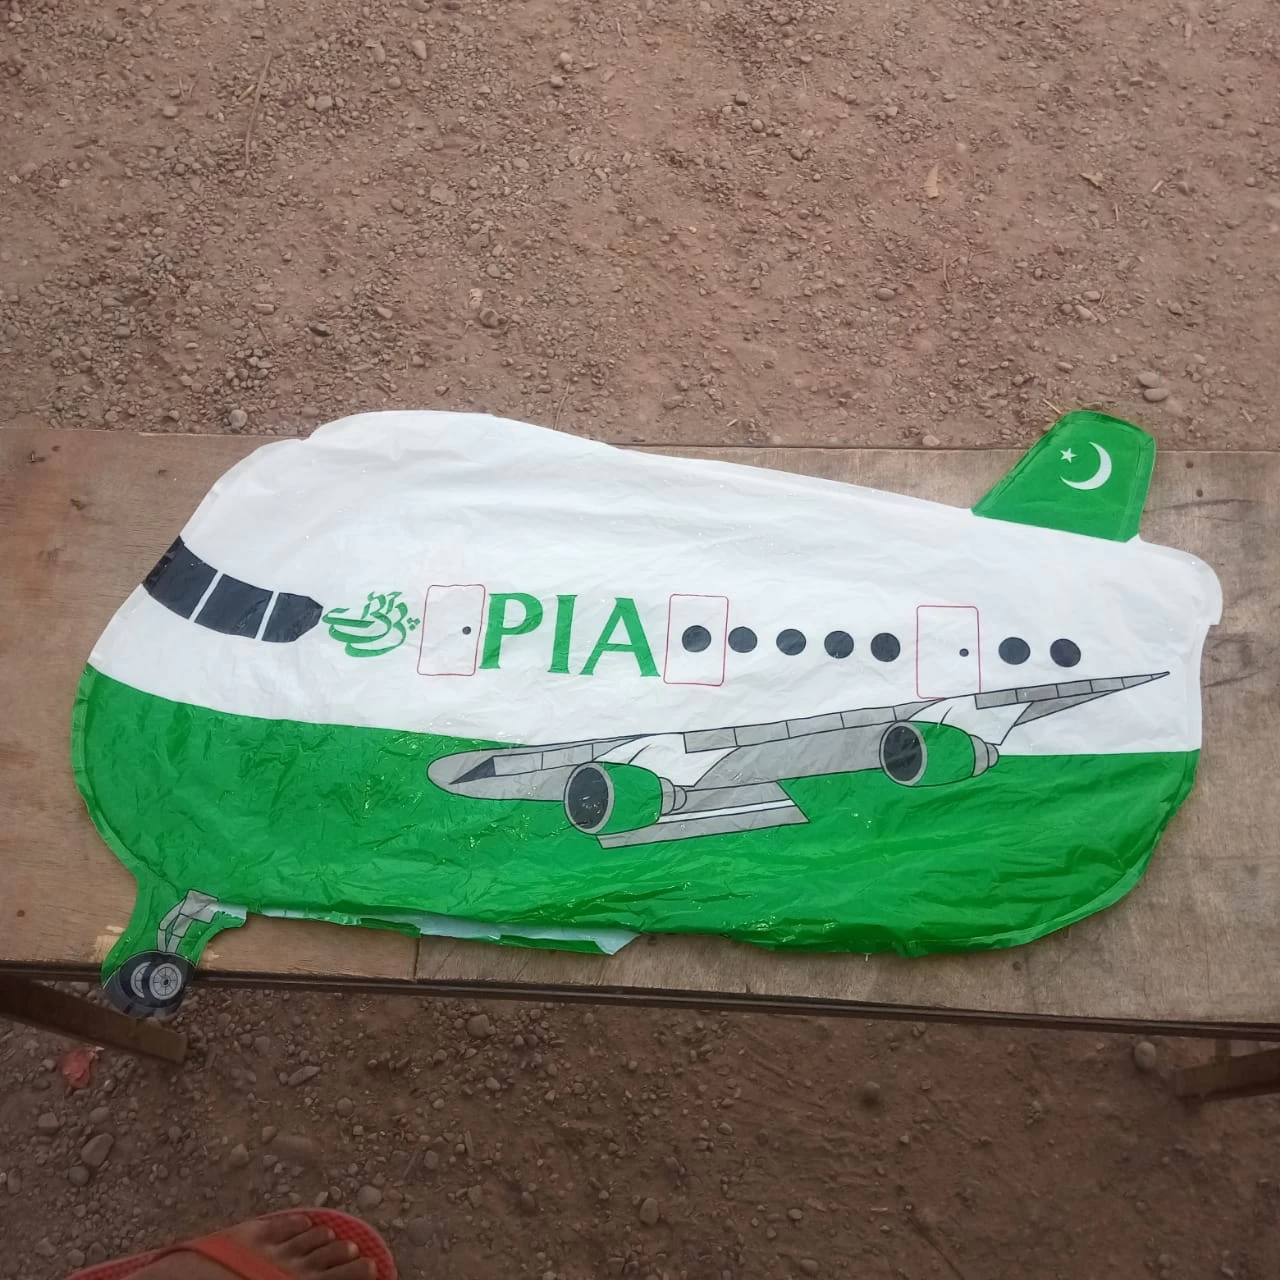 Twitter comes up with hilarious comments after India takes PIA balloon into custody